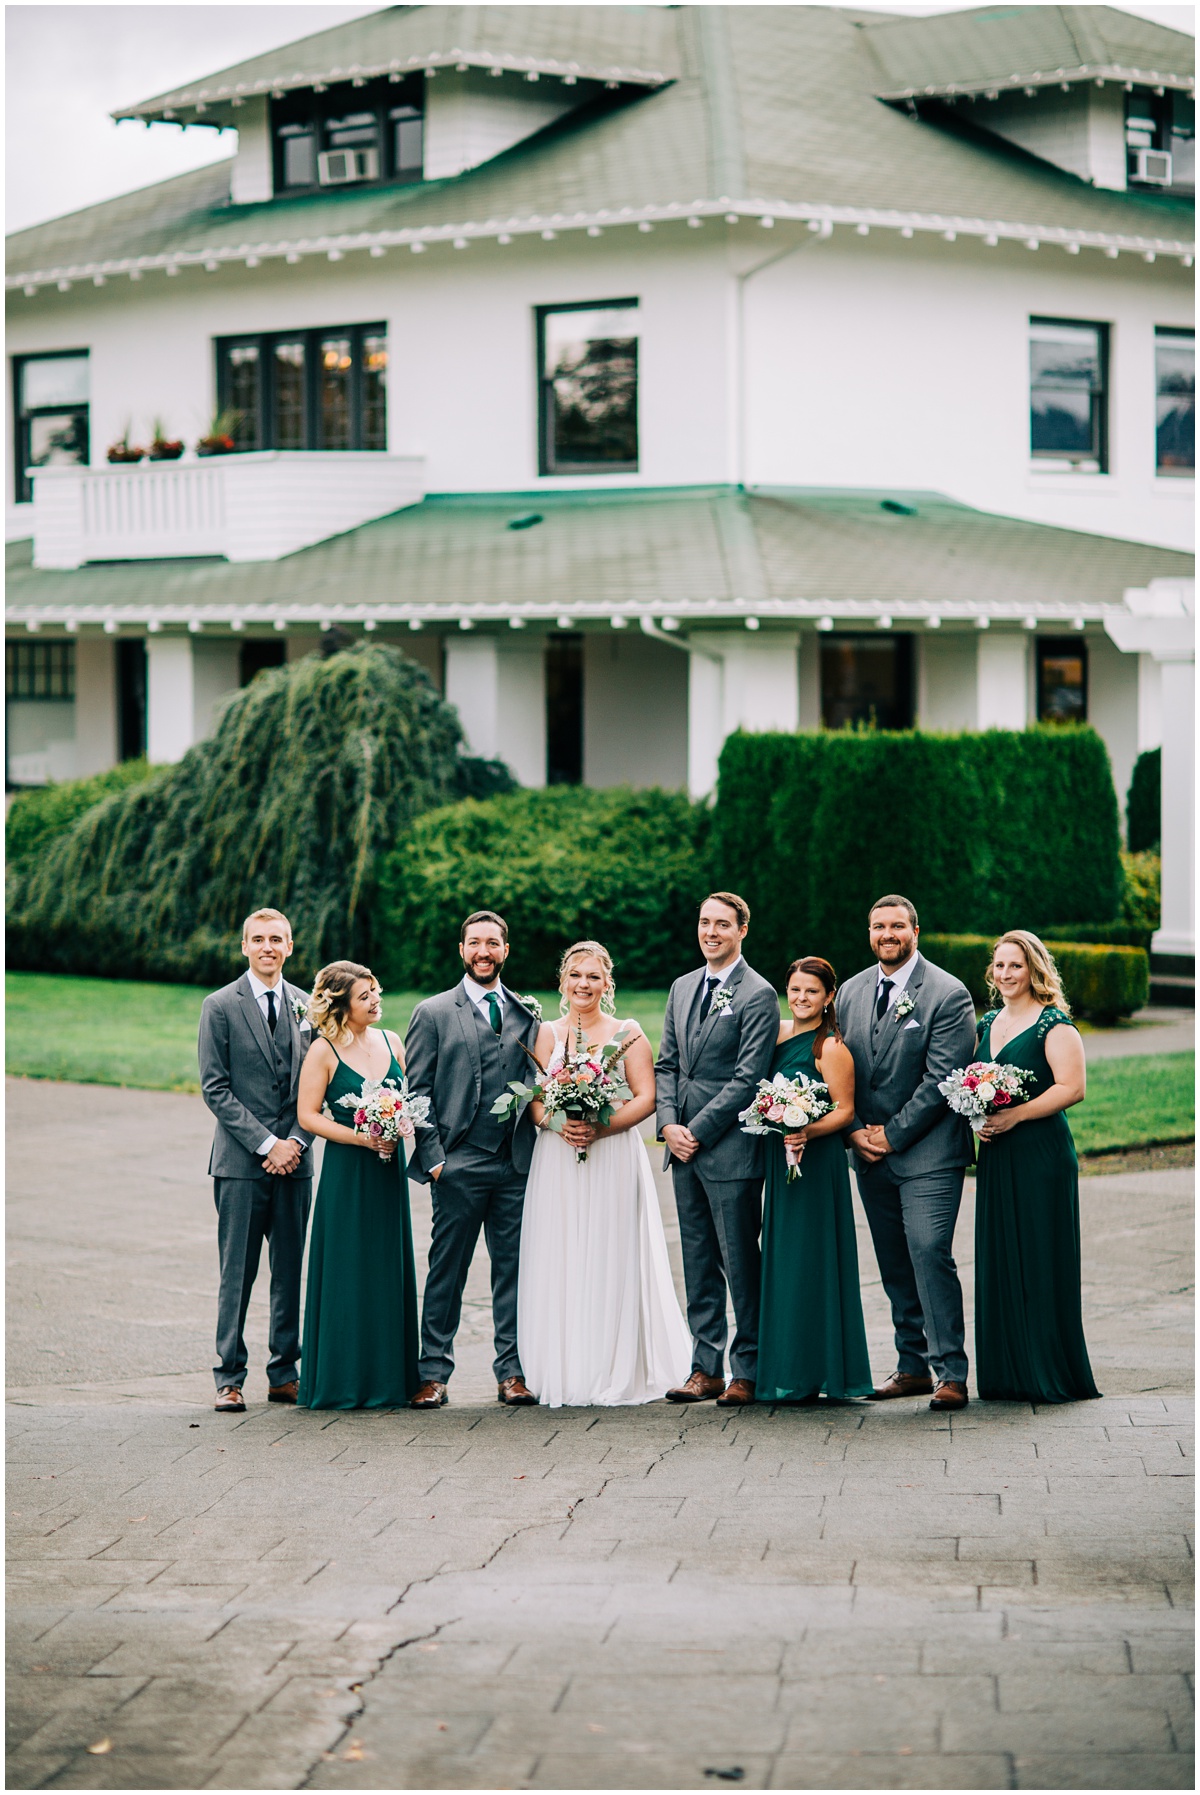 wedding party photo in front of house